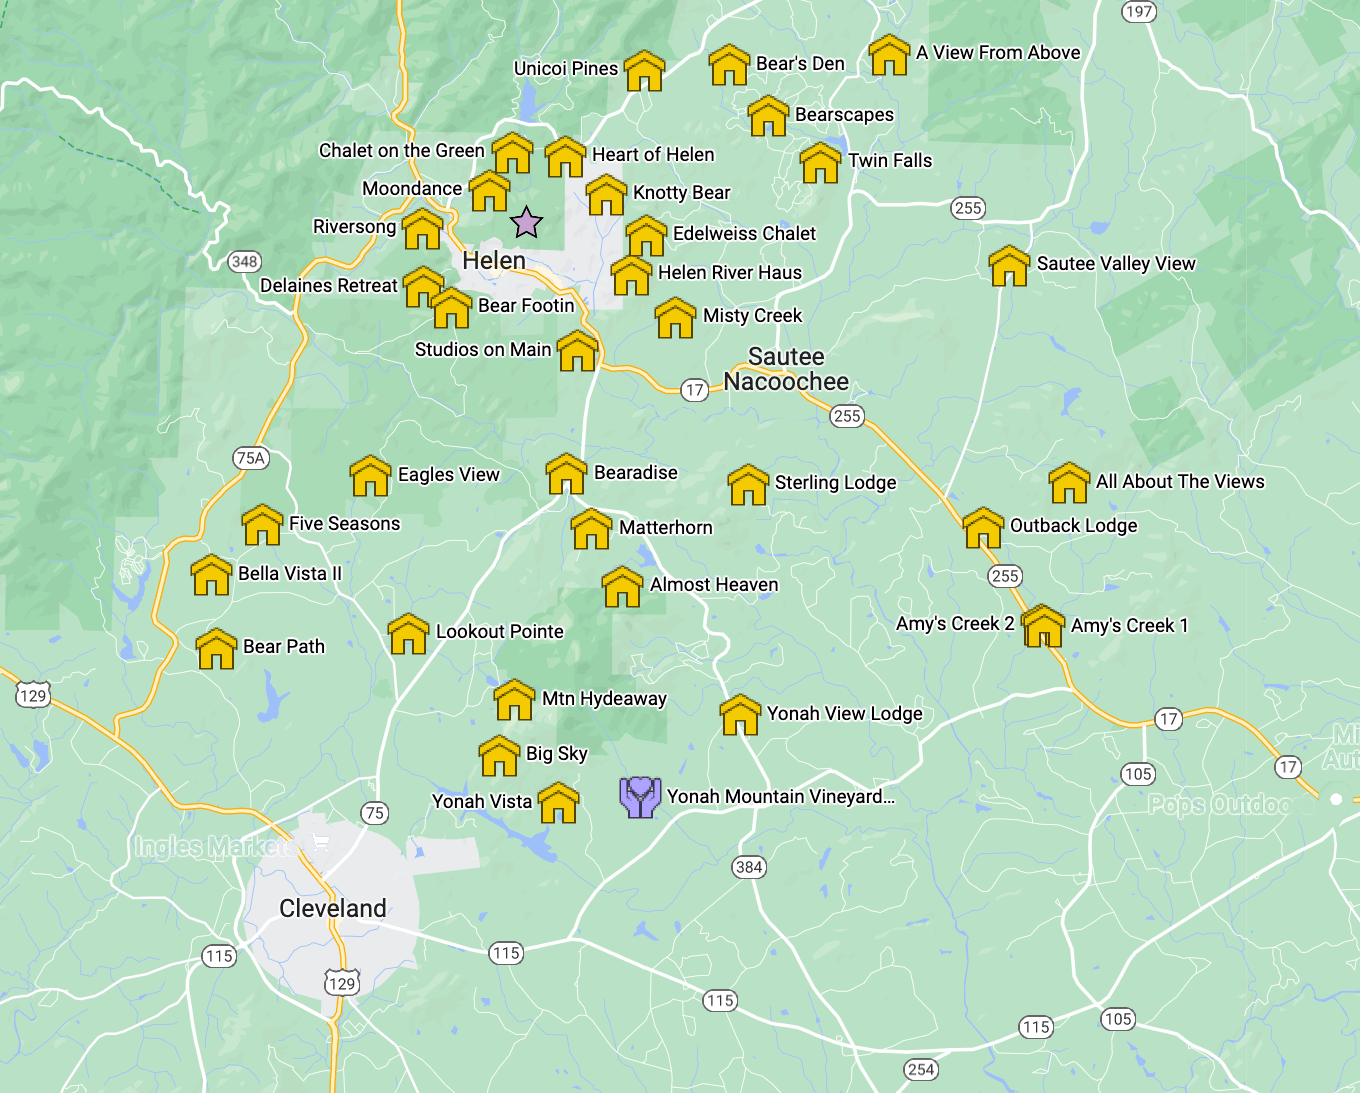 A map of Yonah Mountain Vineyard and nearby cabins.